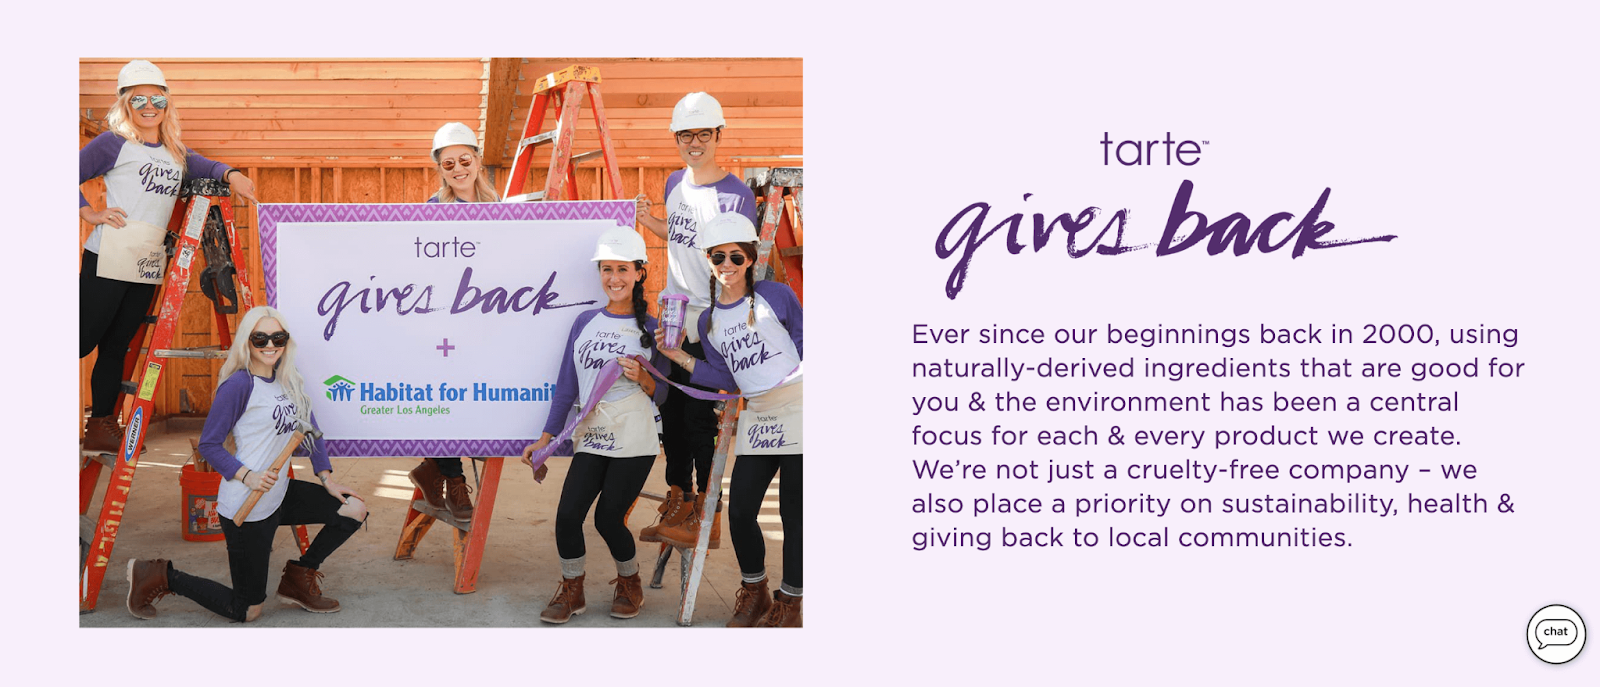 Rewards Case Study tarte perks–A screenshot from the ‘tarte gives back’ page. It shows an image of several people wearing branded tarte shirts and hard hats while holding a sign that says “tarte gives back + Habitat for Humanity”. The text beside the image says, “Ever since our beginnings back in 2000, using naturally-derived ingredients that are good for you & the environment has been a central focus for each & every product we create. We’re not just a cruelty-free company – we also place a priority on sustainability, health & giving back to local communities.”